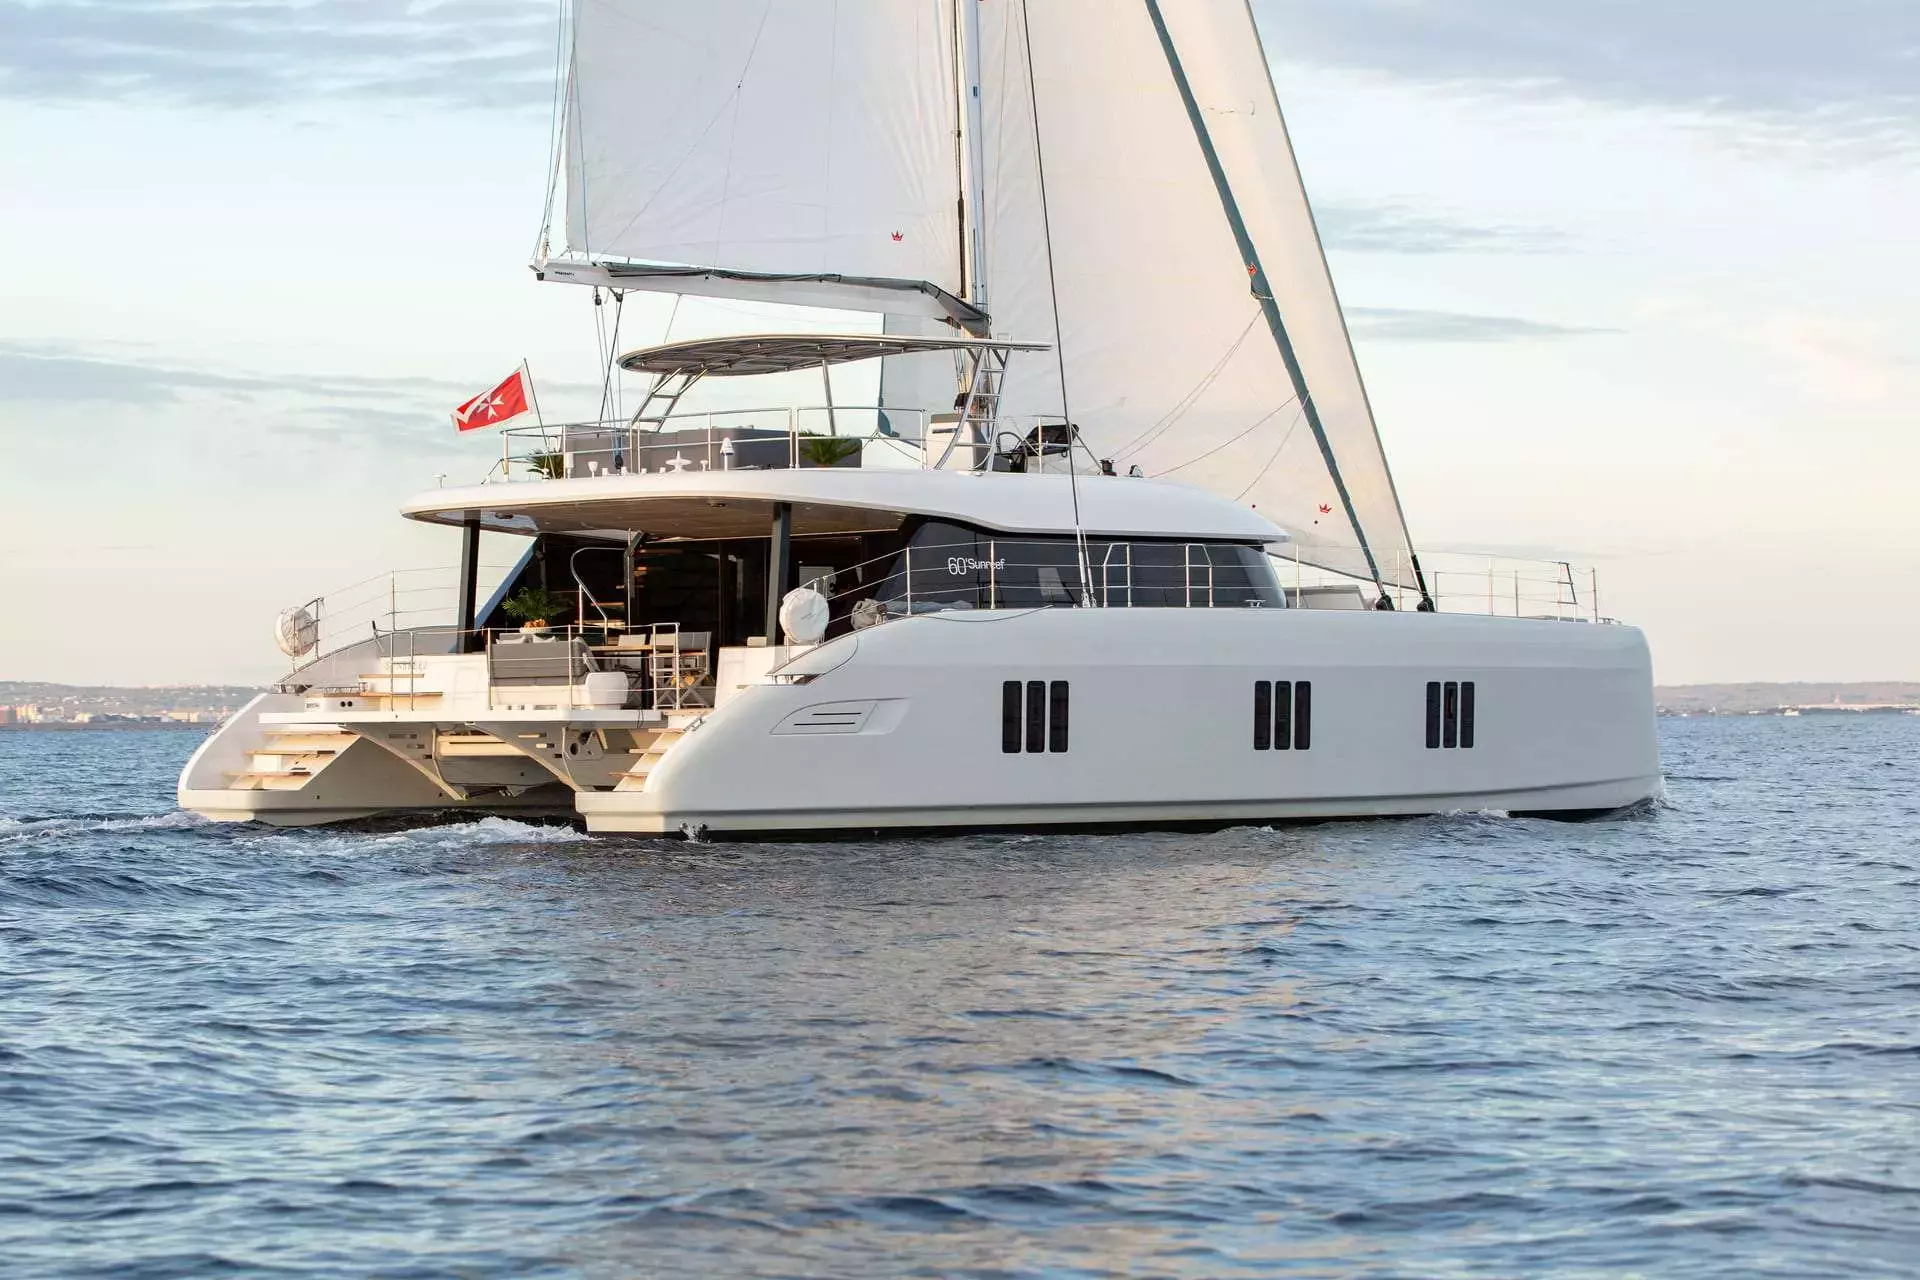 Sunbreeze by Sunreef Yachts - Special Offer for a private Sailing Catamaran Charter in Ibiza with a crew